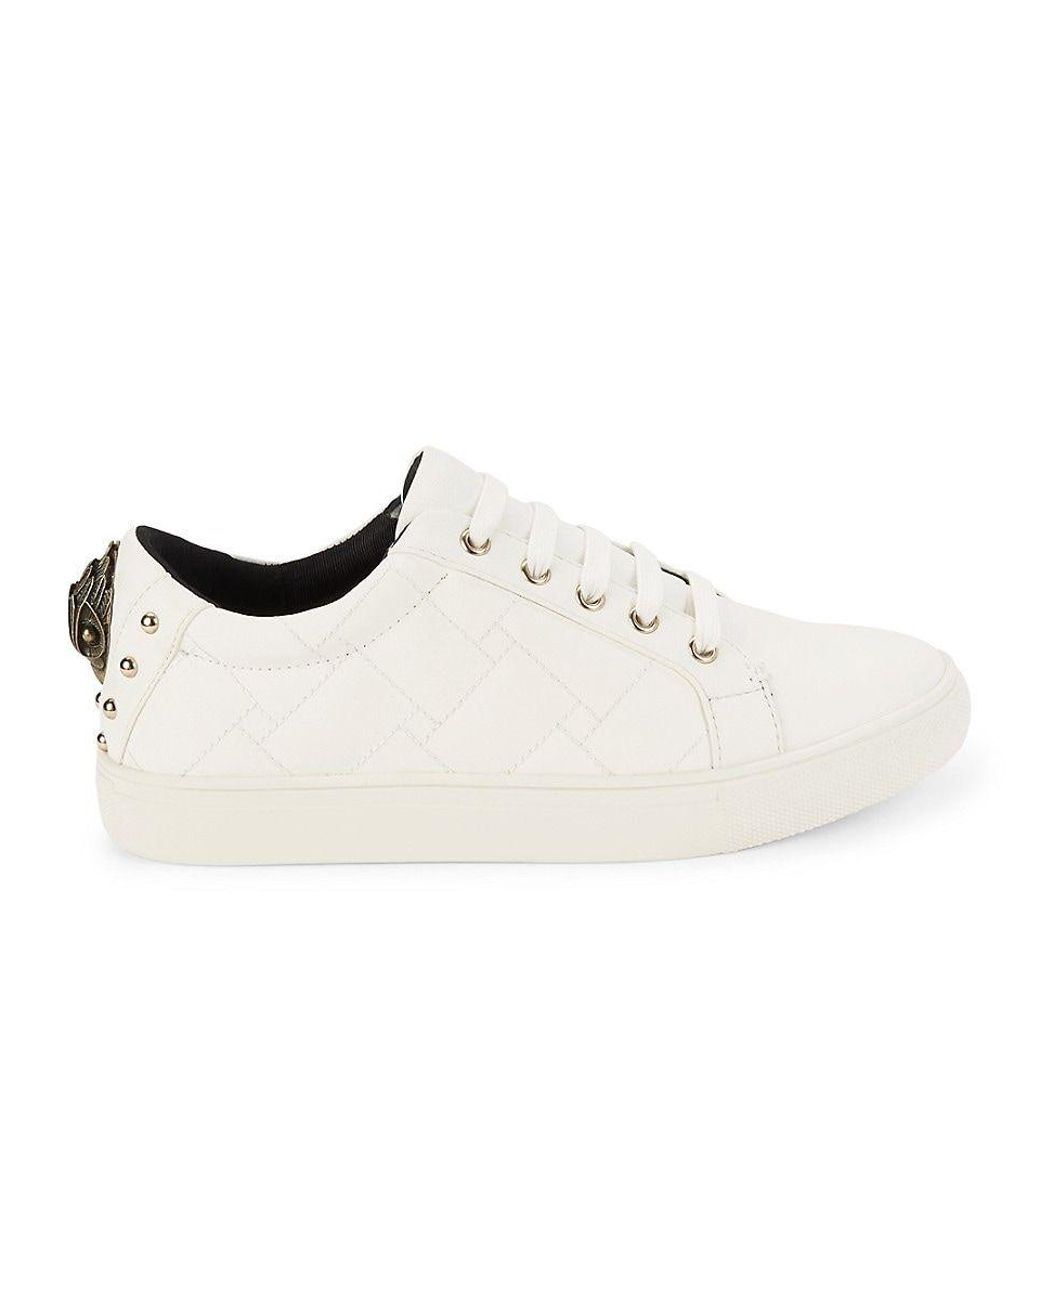 Kurt Geiger Ludo Quilted Leather Sneakers in White | Lyst